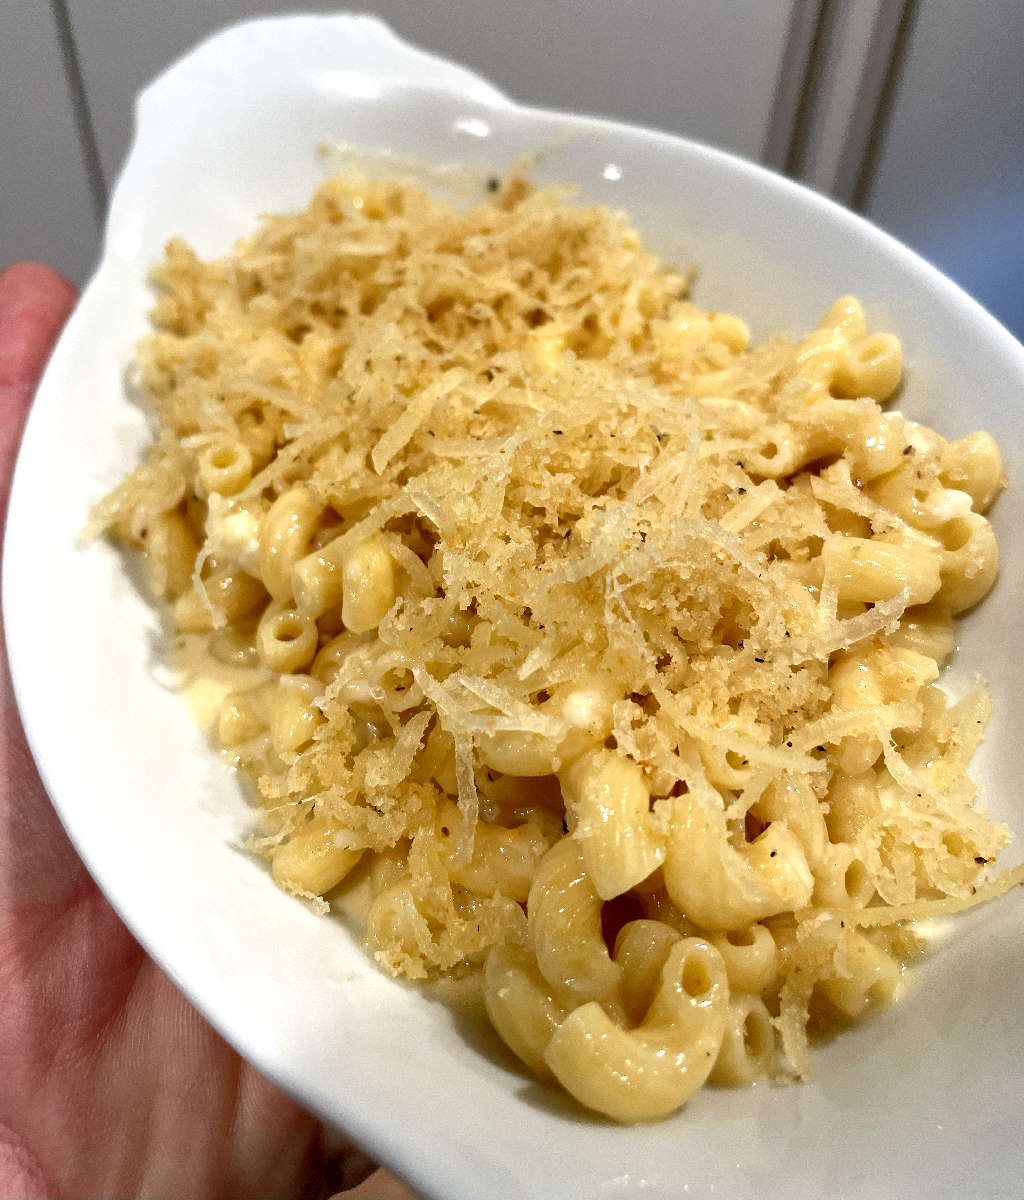 Mac and cheese on plate.